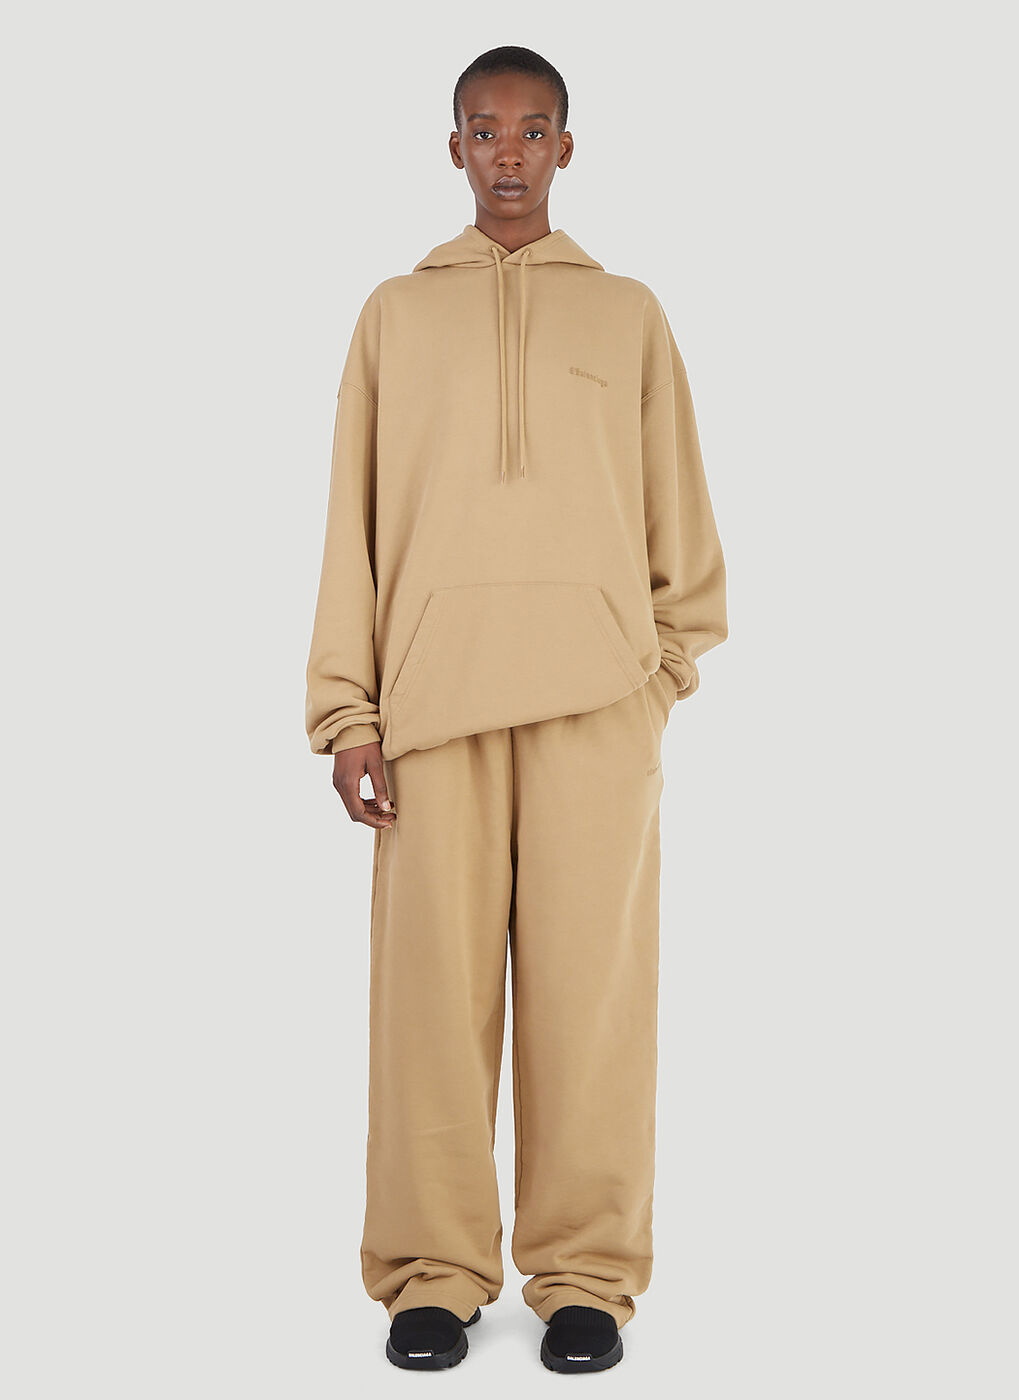 The Ragged Priest oversized track pants in color block  ASOS